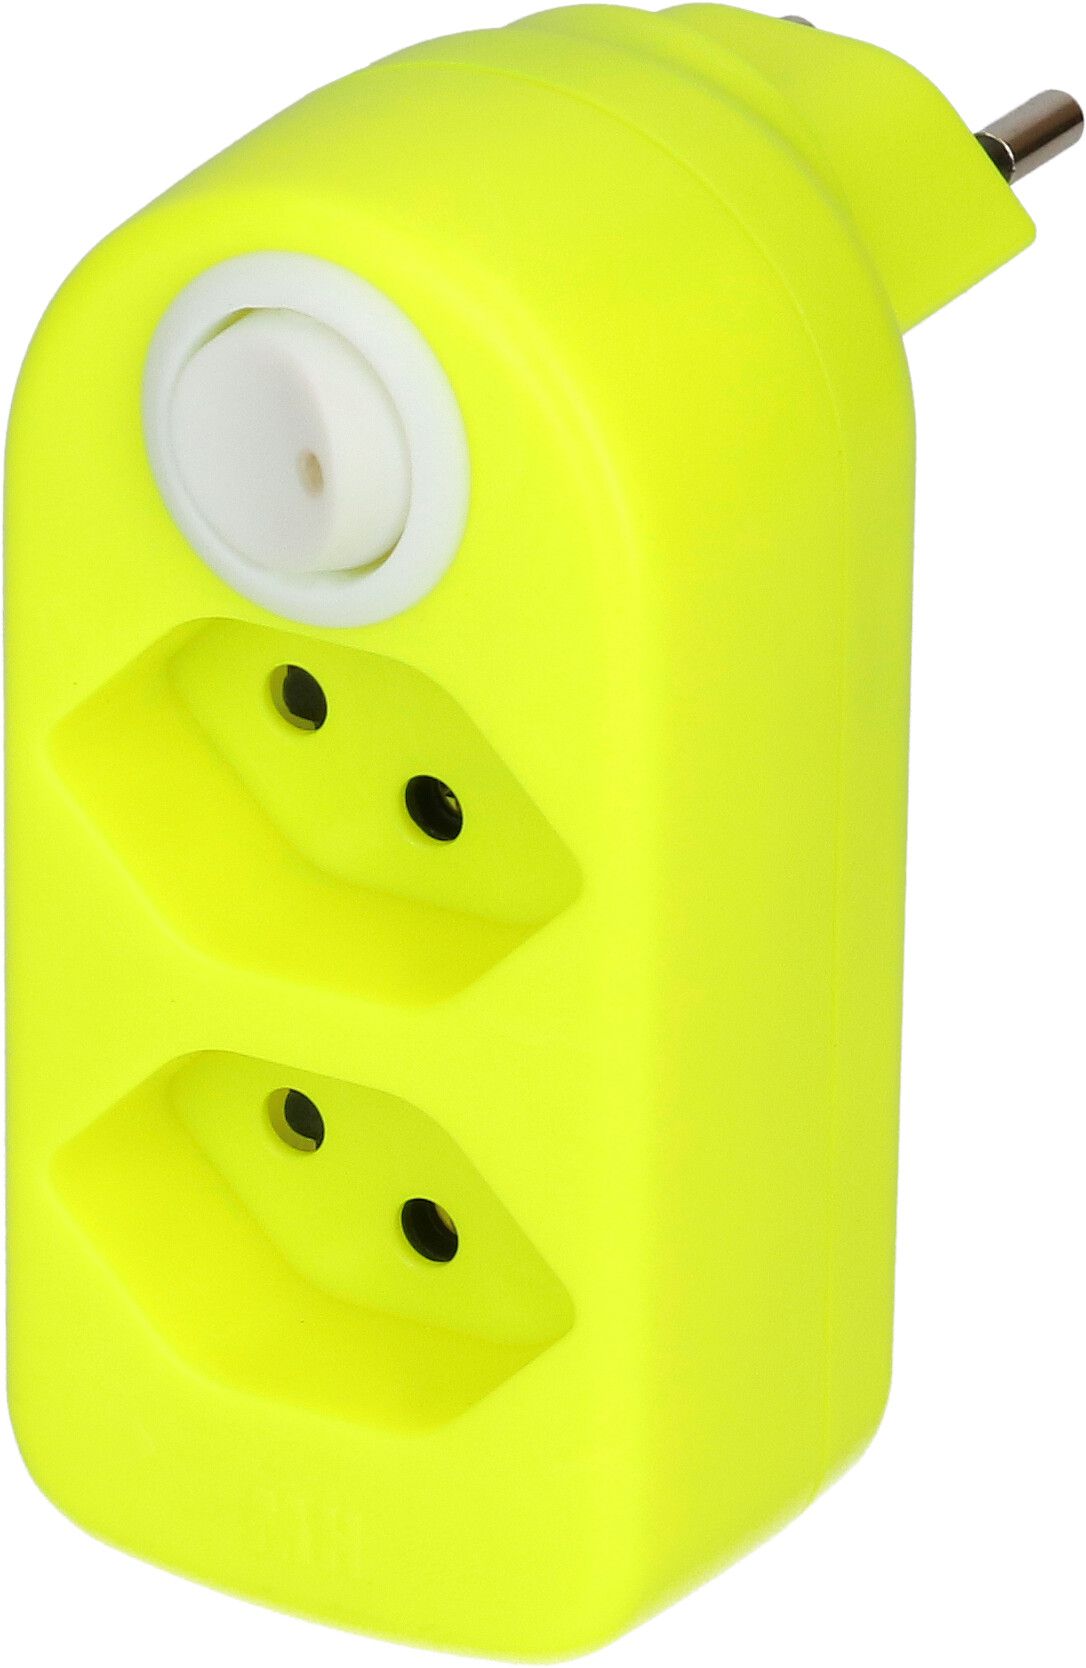 Adaptor 2x type 13 turnable switch fluo-yellow